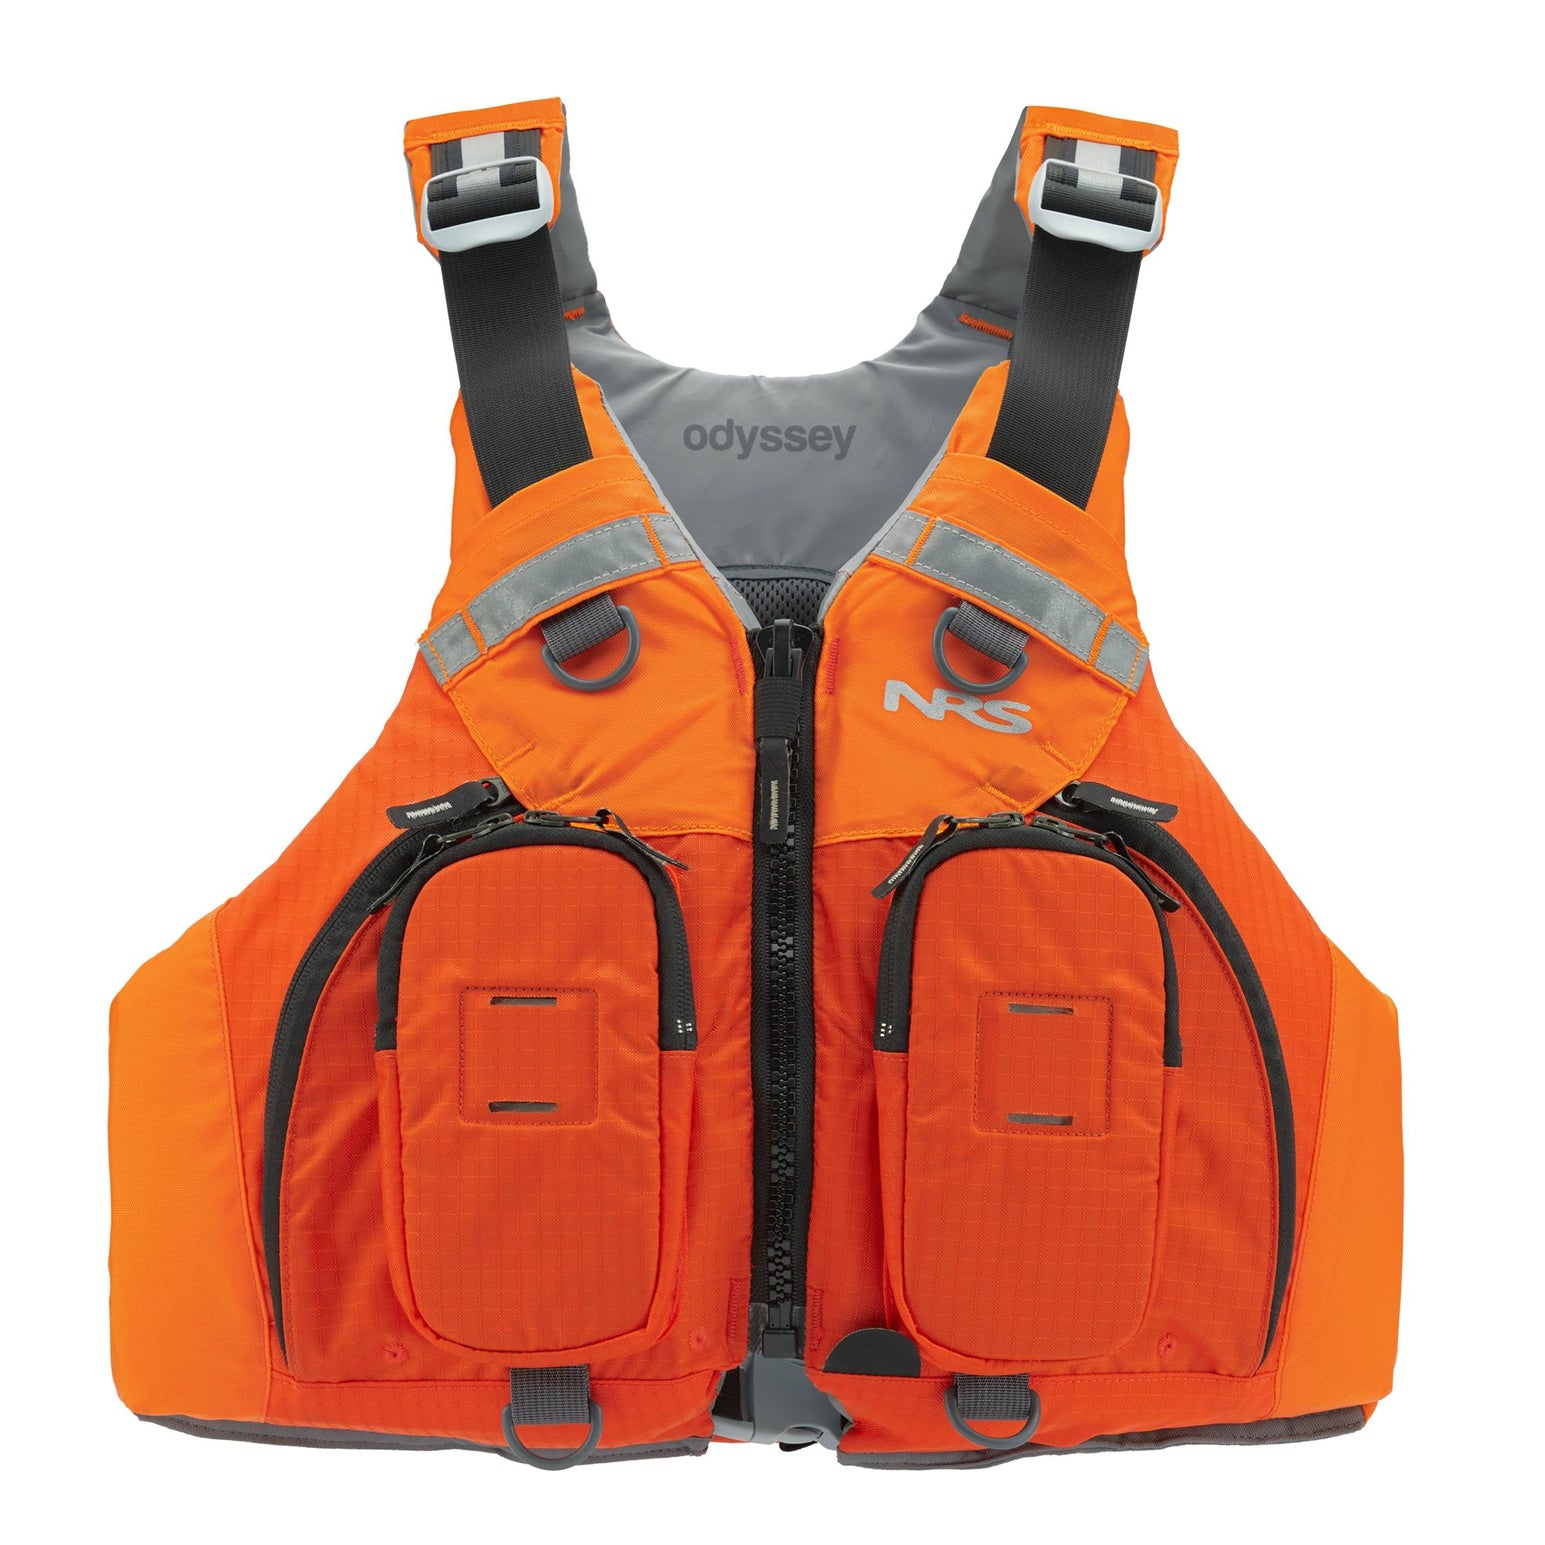 NRS Odyssey Touring Buoyancy Aids